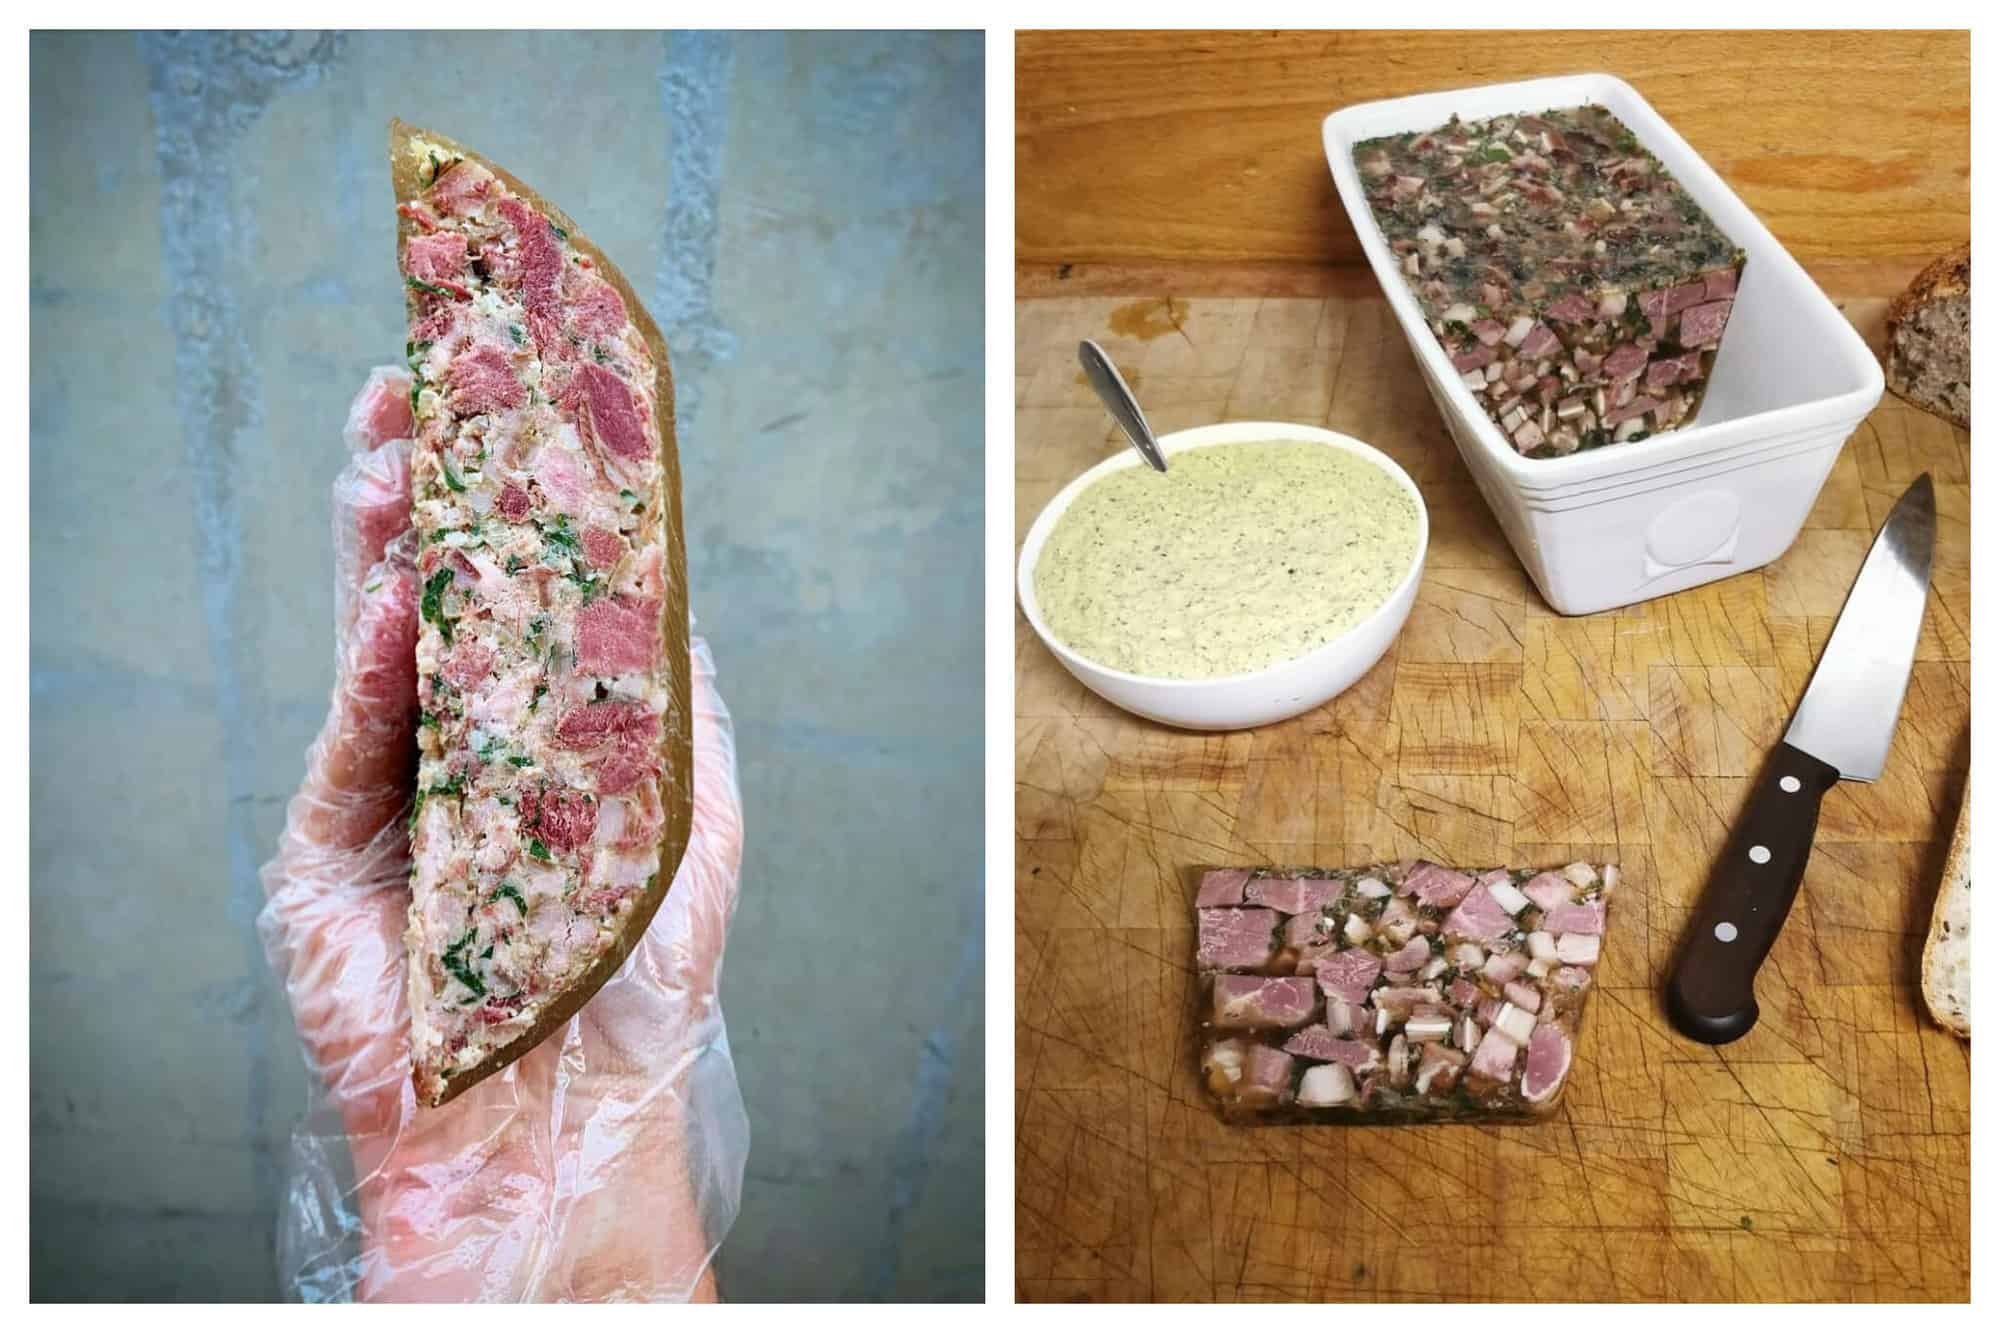 Left: A photo of a hand with a plactic glove holding a slice of the french dish fromage de tête in front of a stone wall. Right: a photo of fromage de tête in a dish, with one slice taken out and lying on the wooden table in front of a bowl of sauce. 